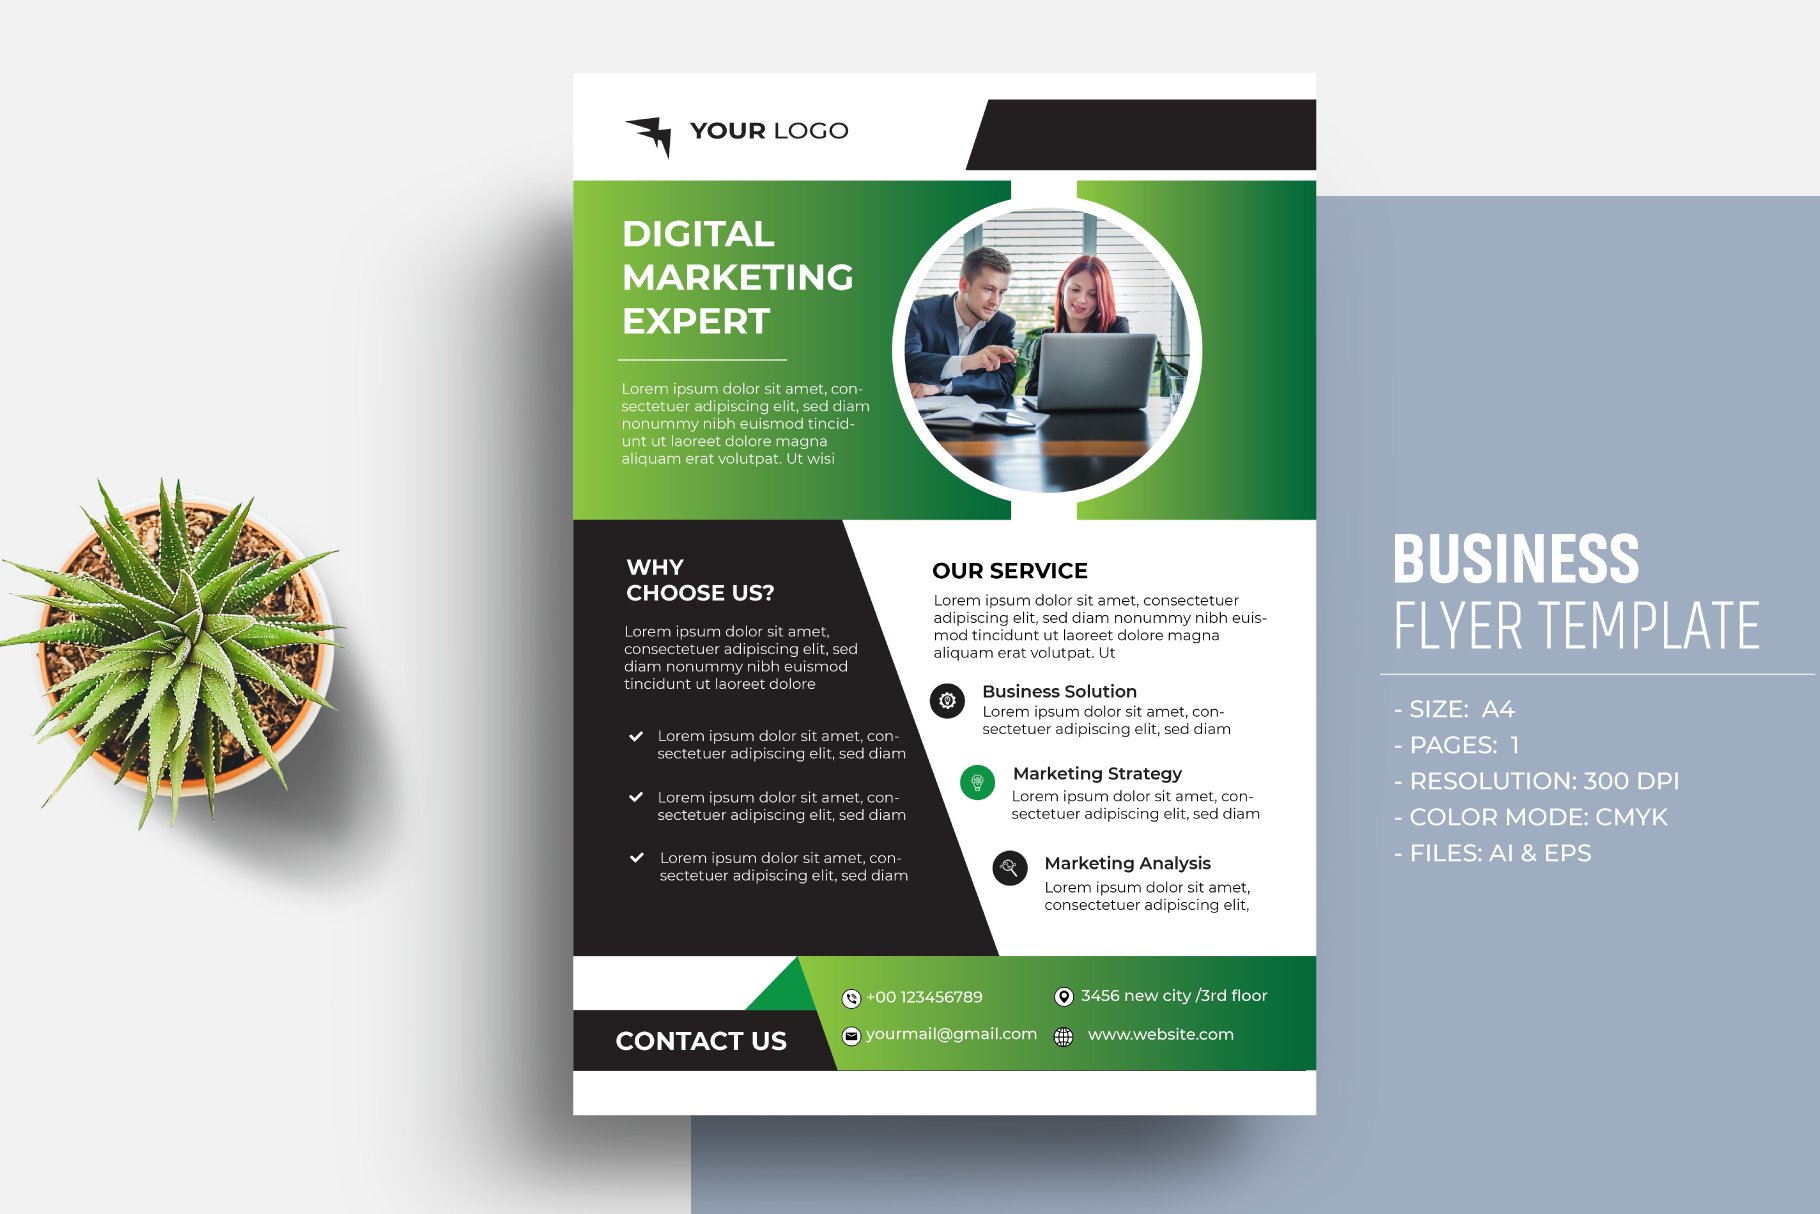 Corporate Business Flyer Template cover image.